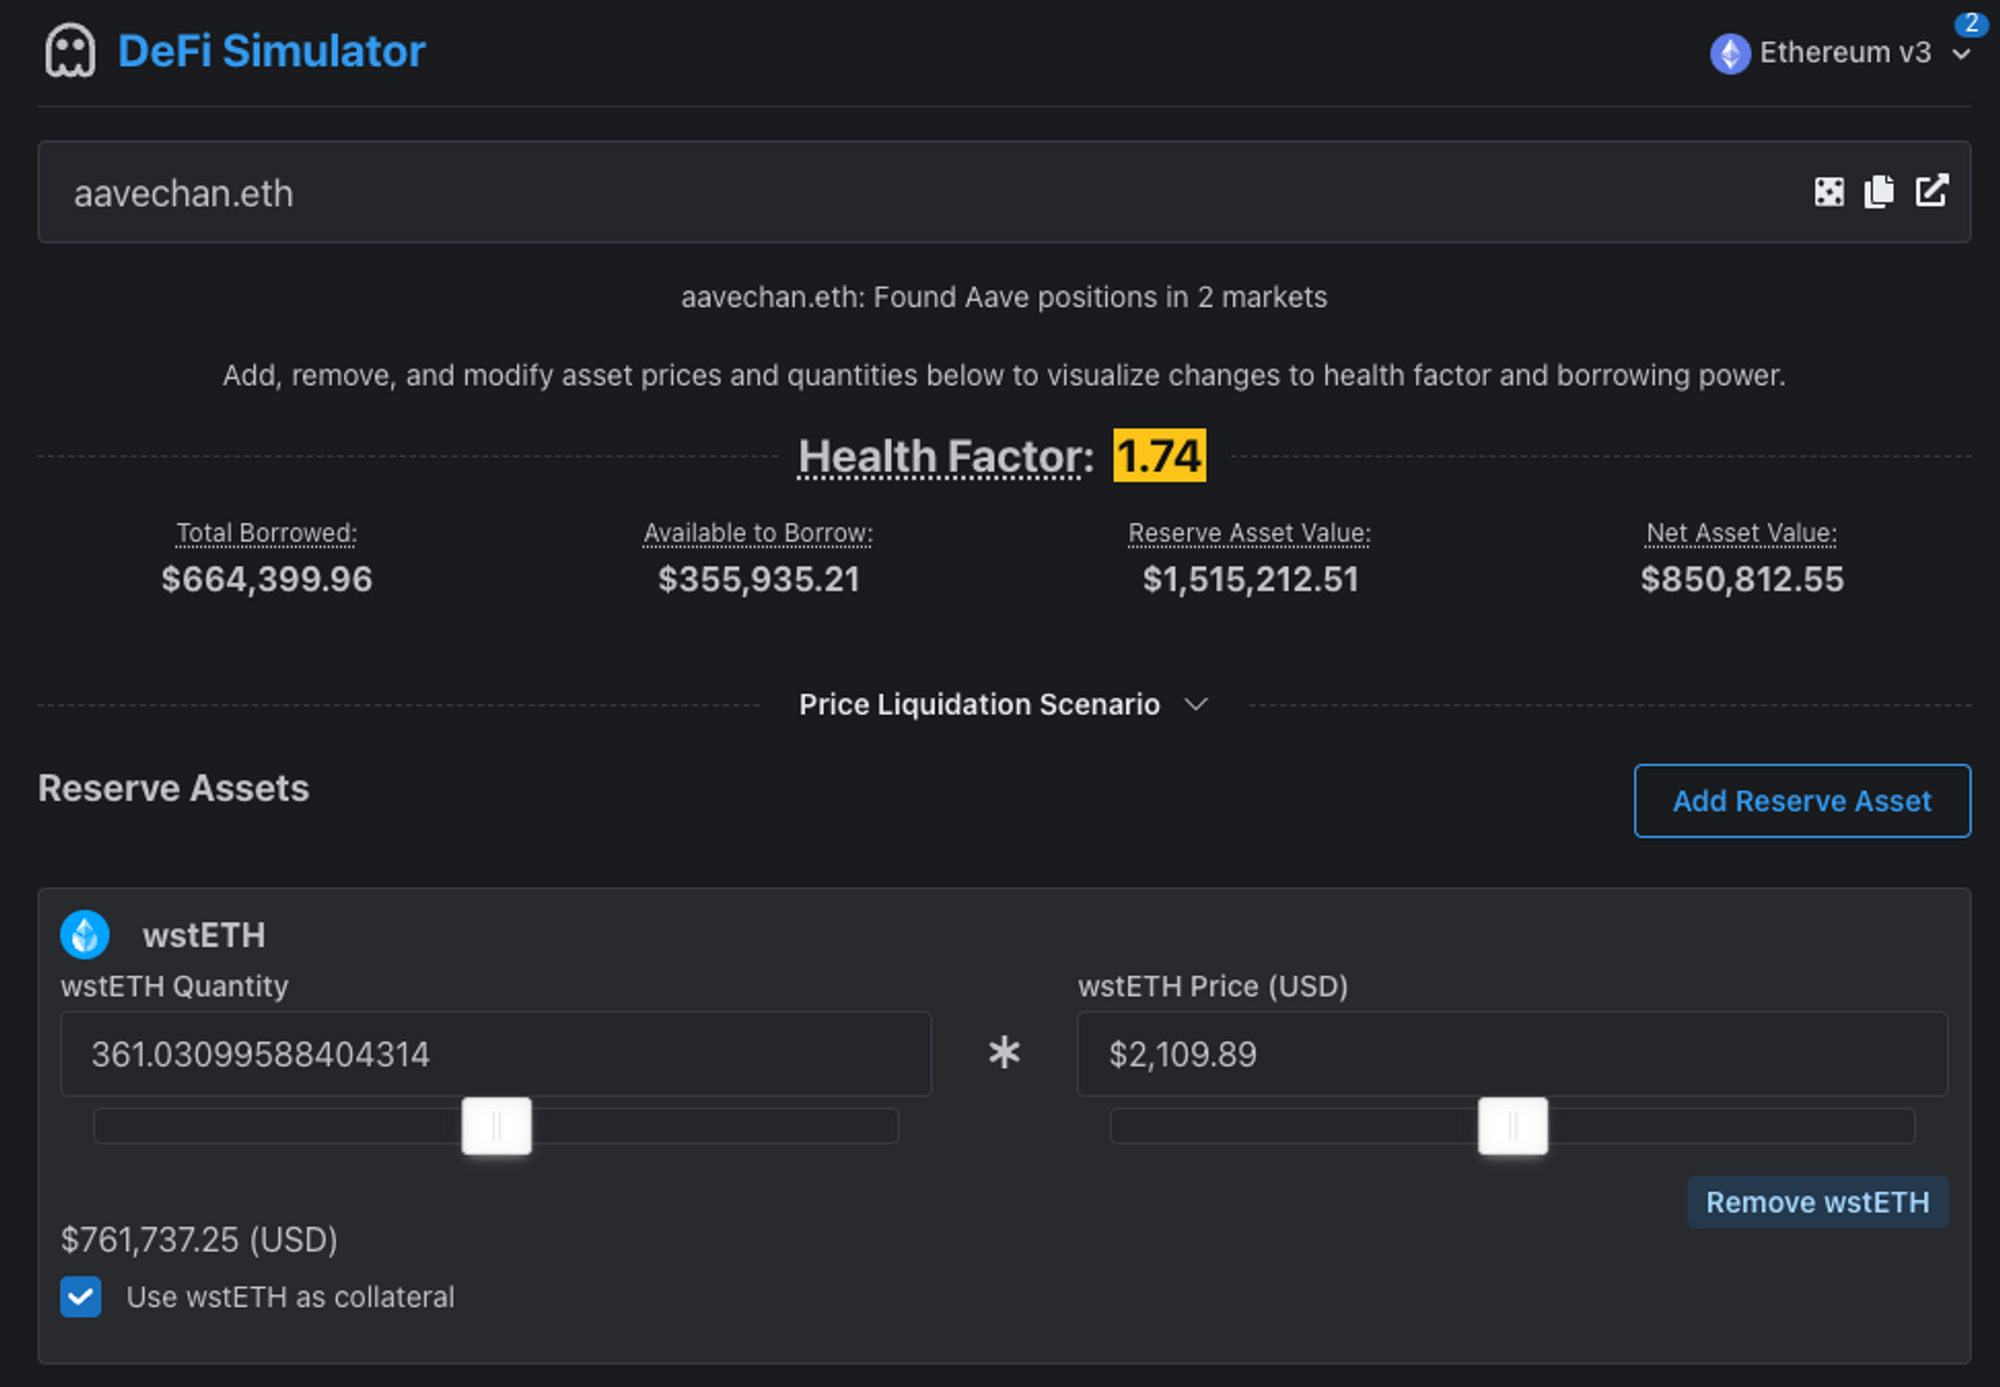 A screenshot of the DeFi Simulator interface - showing an account with a health factor of 1.74 and other key stats.